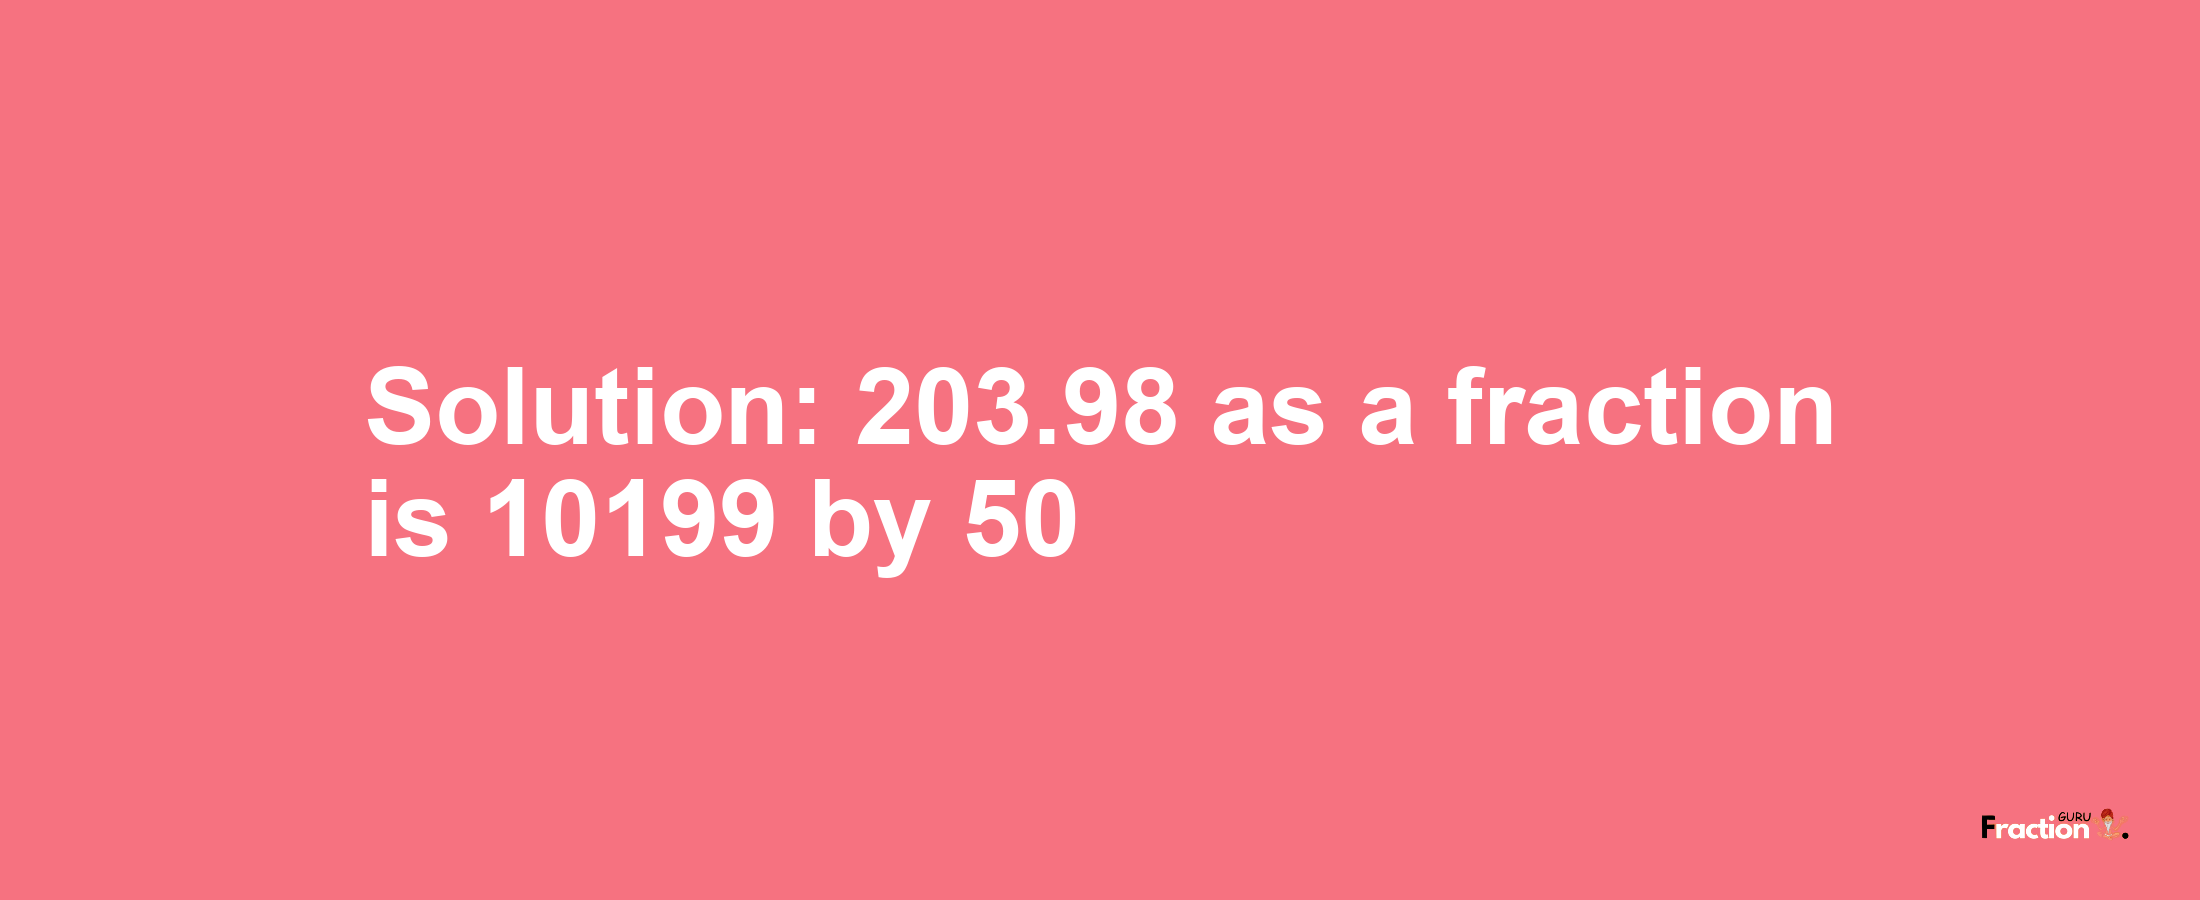 Solution:203.98 as a fraction is 10199/50